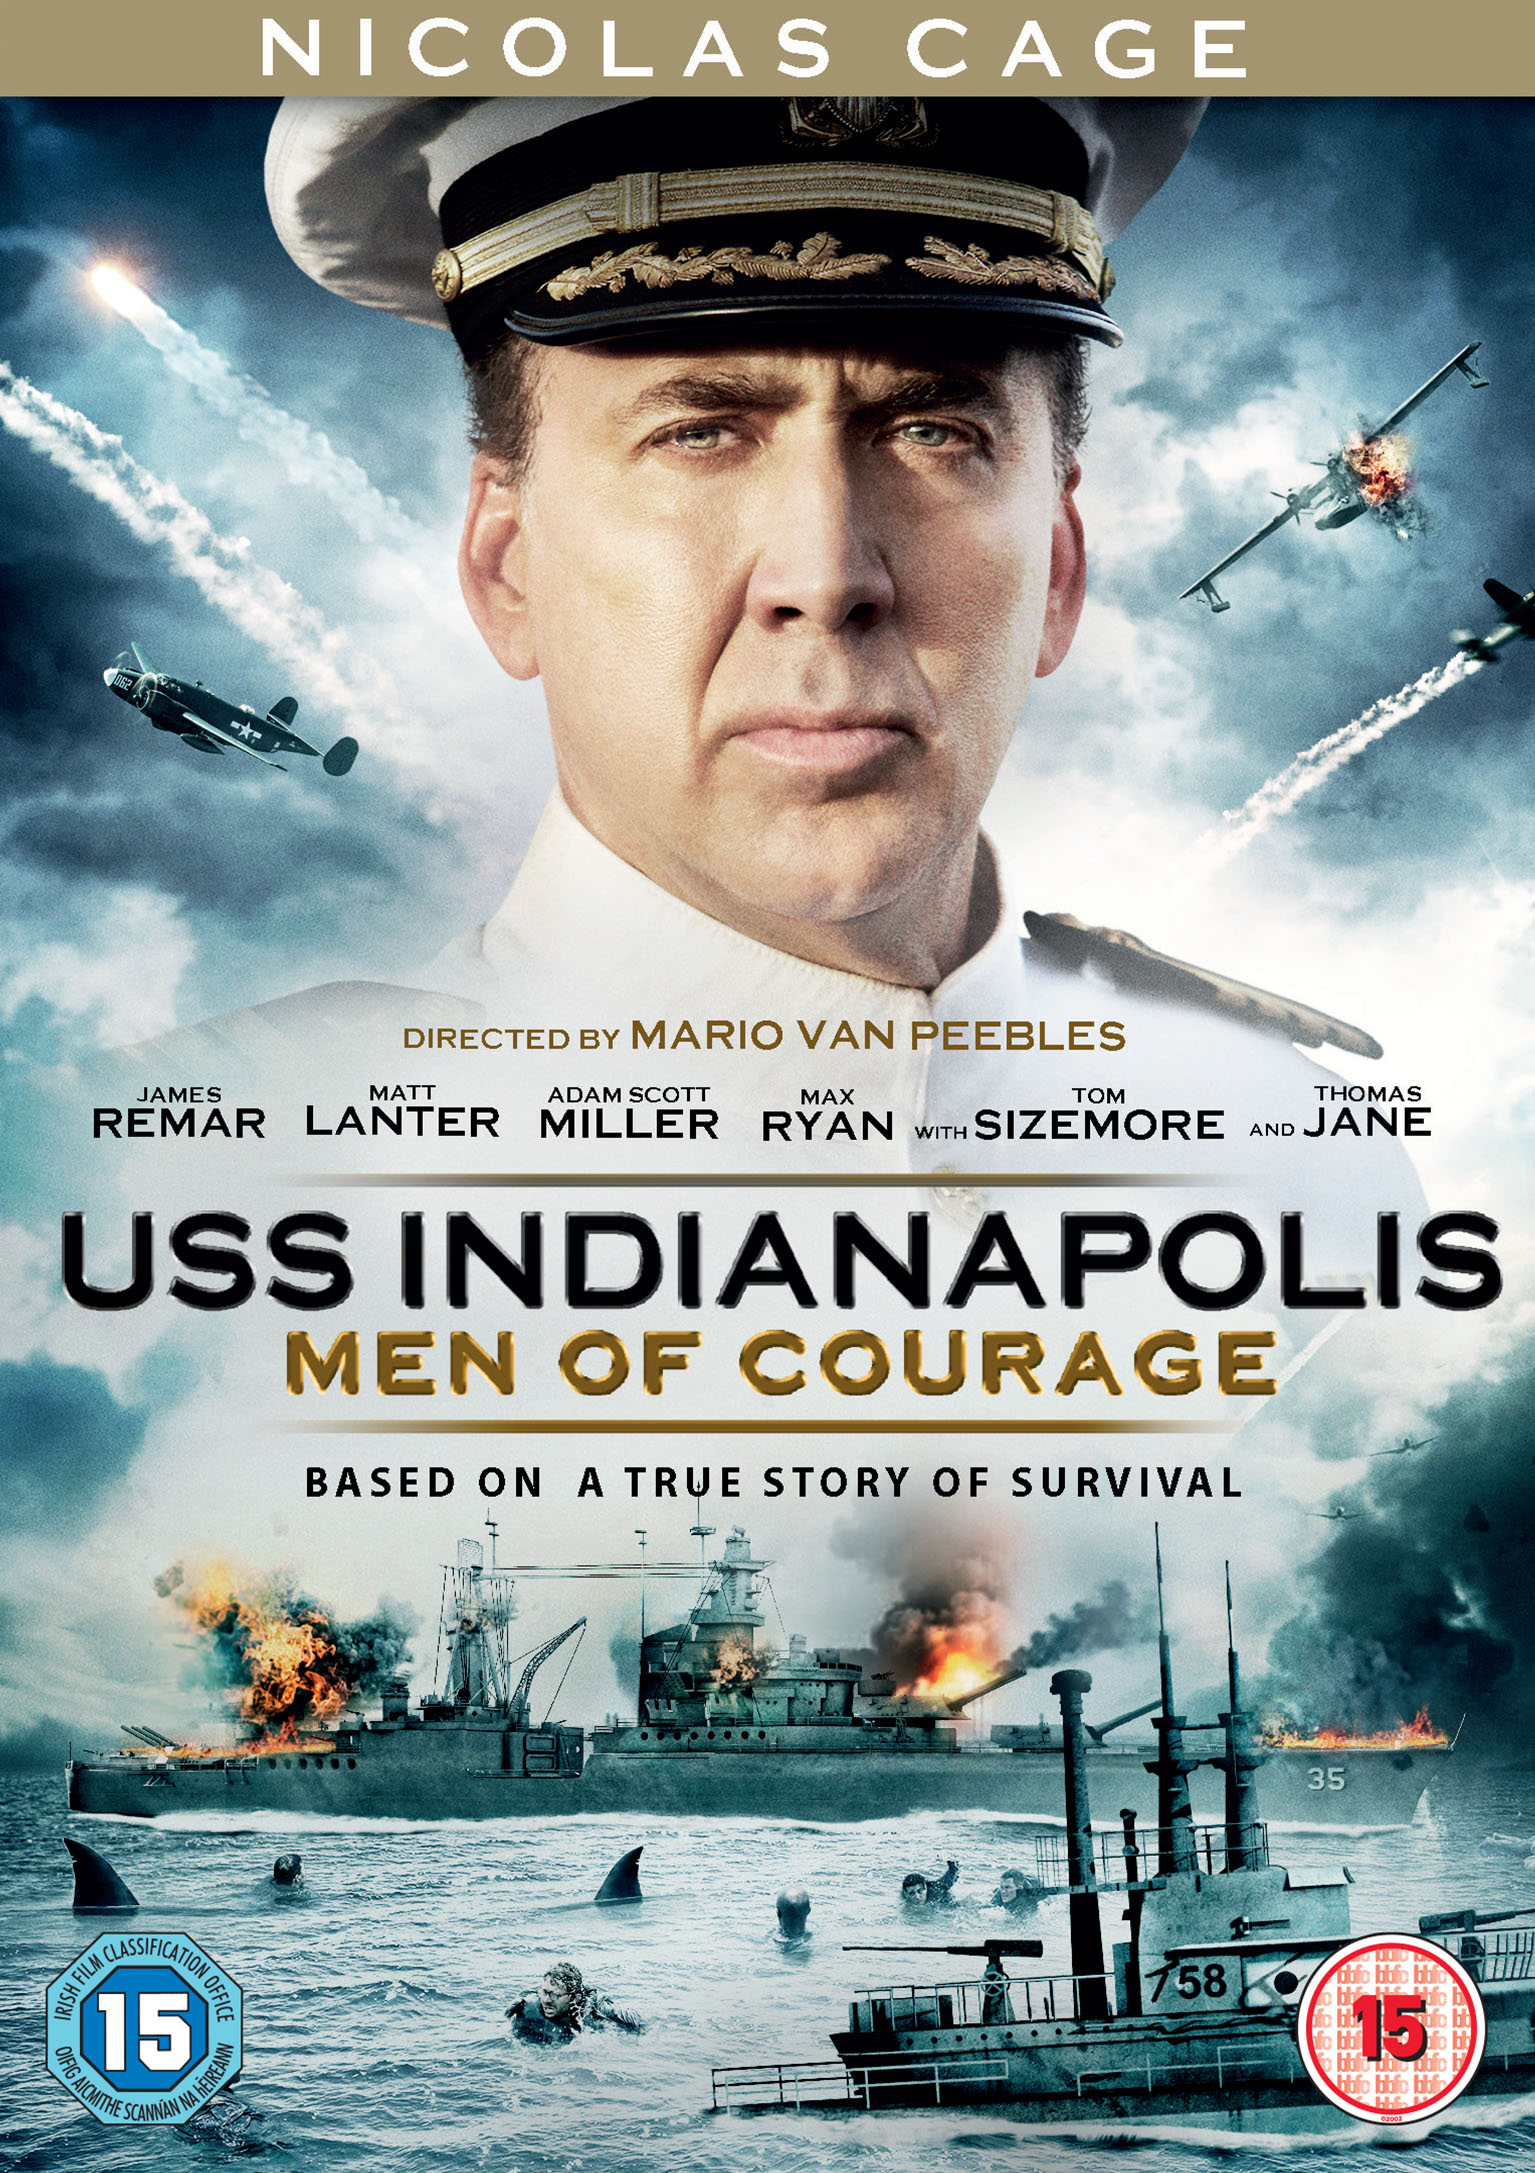 Uss Indianapolis 2016 Not So Much A War Movie Than An Action